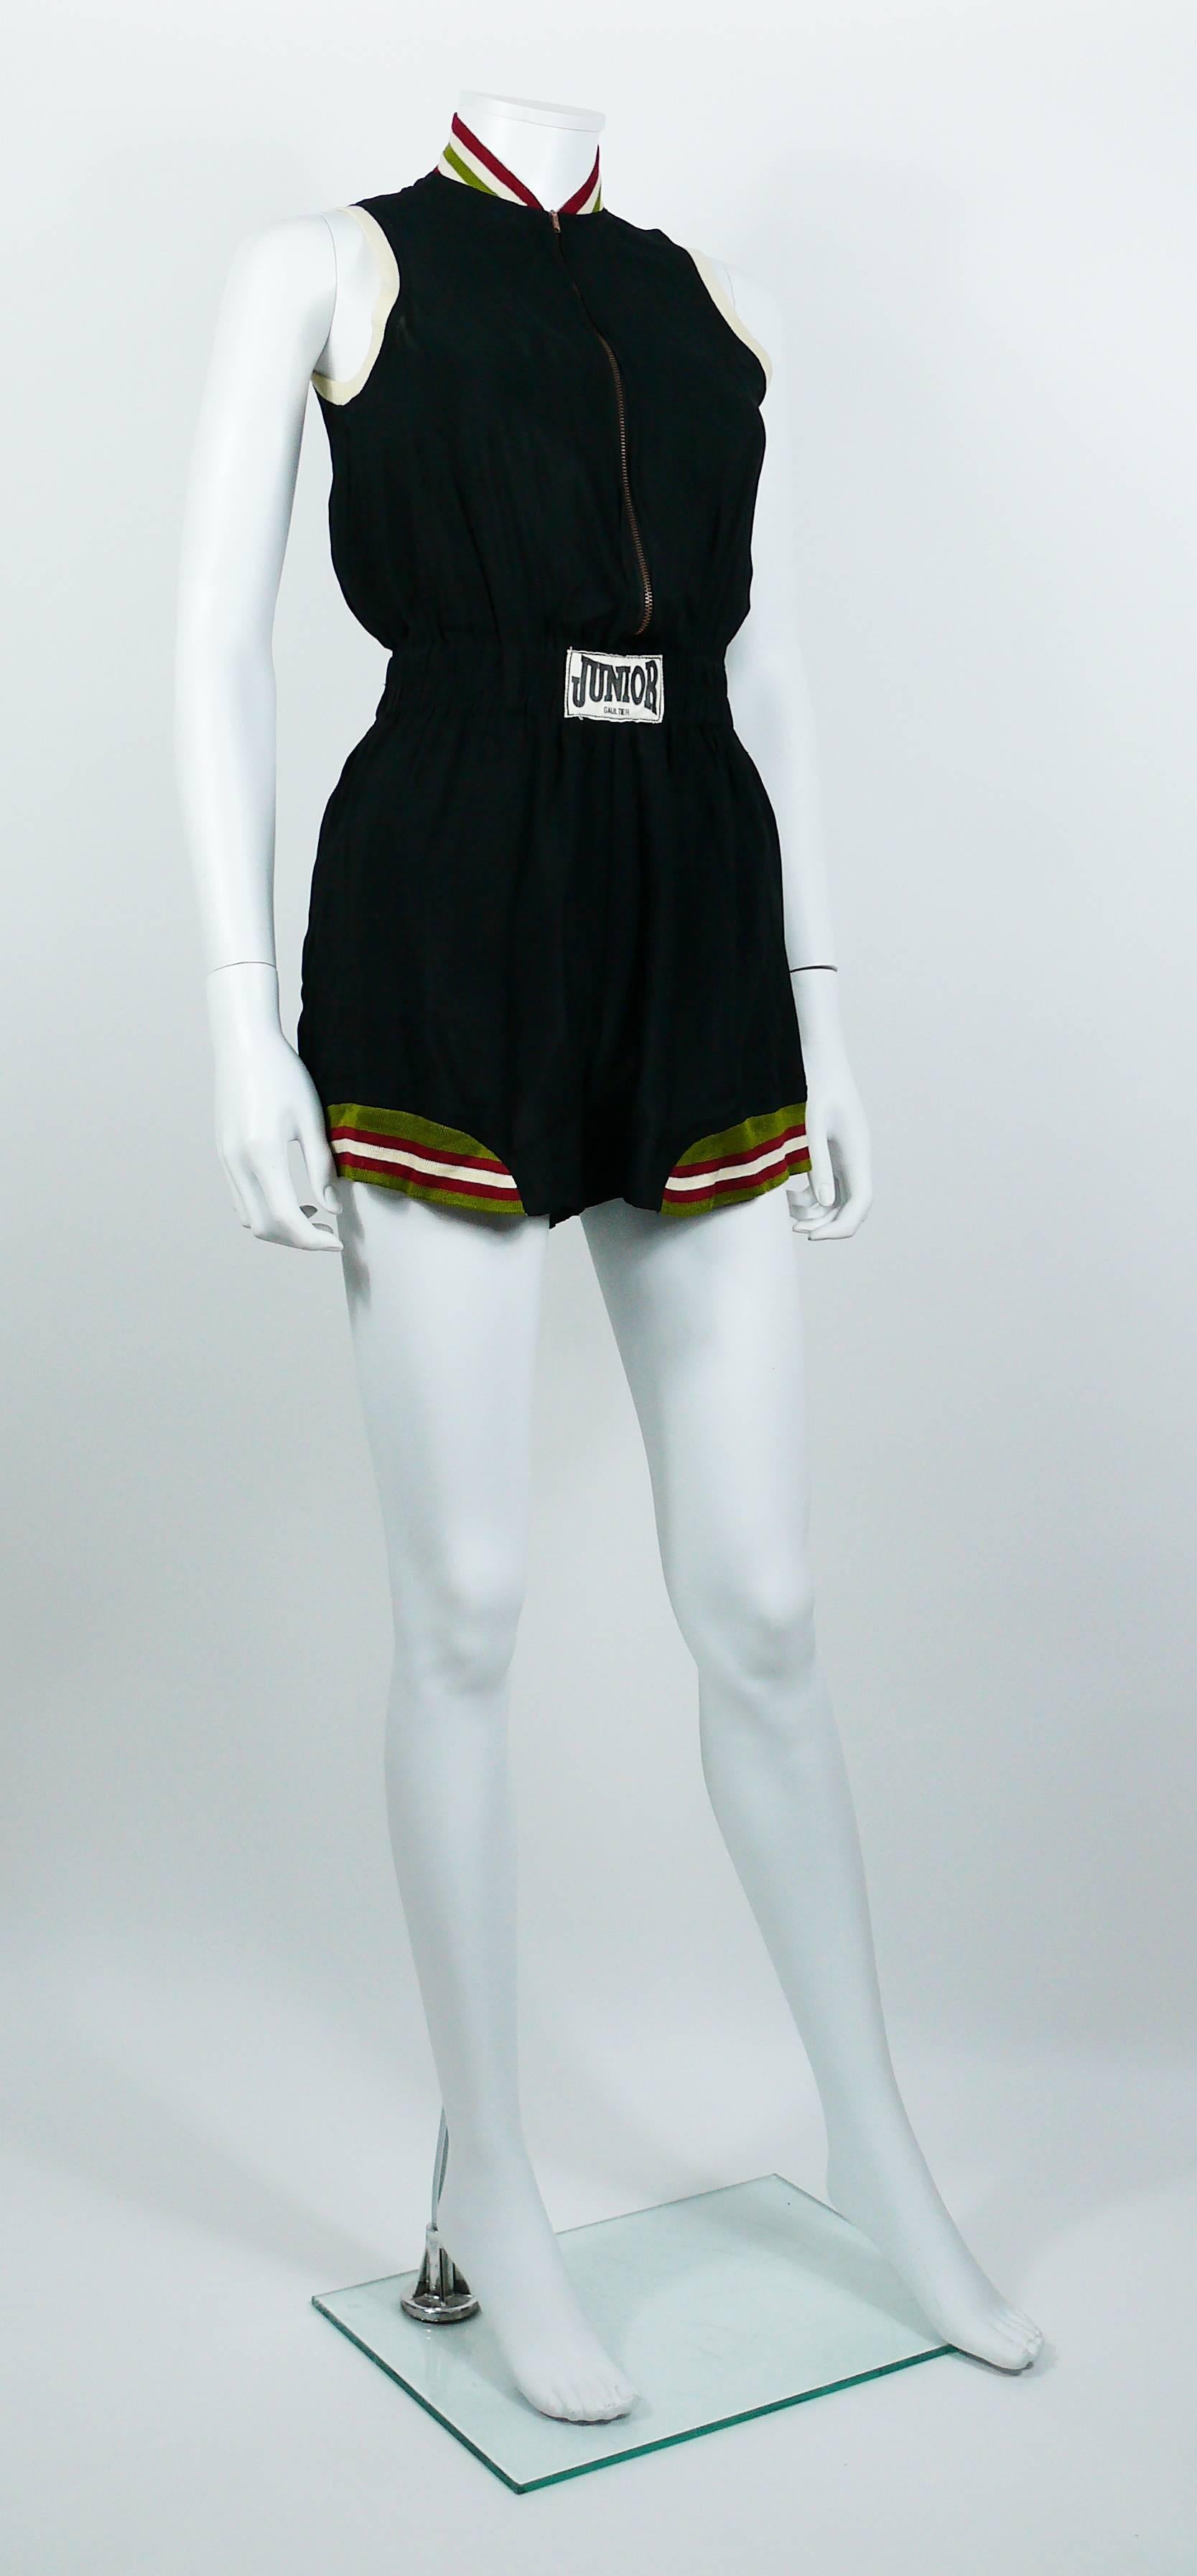 JEAN PAUL GAULTIER vintage rare 1990s black shortall inspired by boxing outfits.

This shortall features :
- Black viscose with multicolored knitted striped details.
- Short sleeves.
- Short shorts.
- Elastic waistband with Junior Gaultier patch at